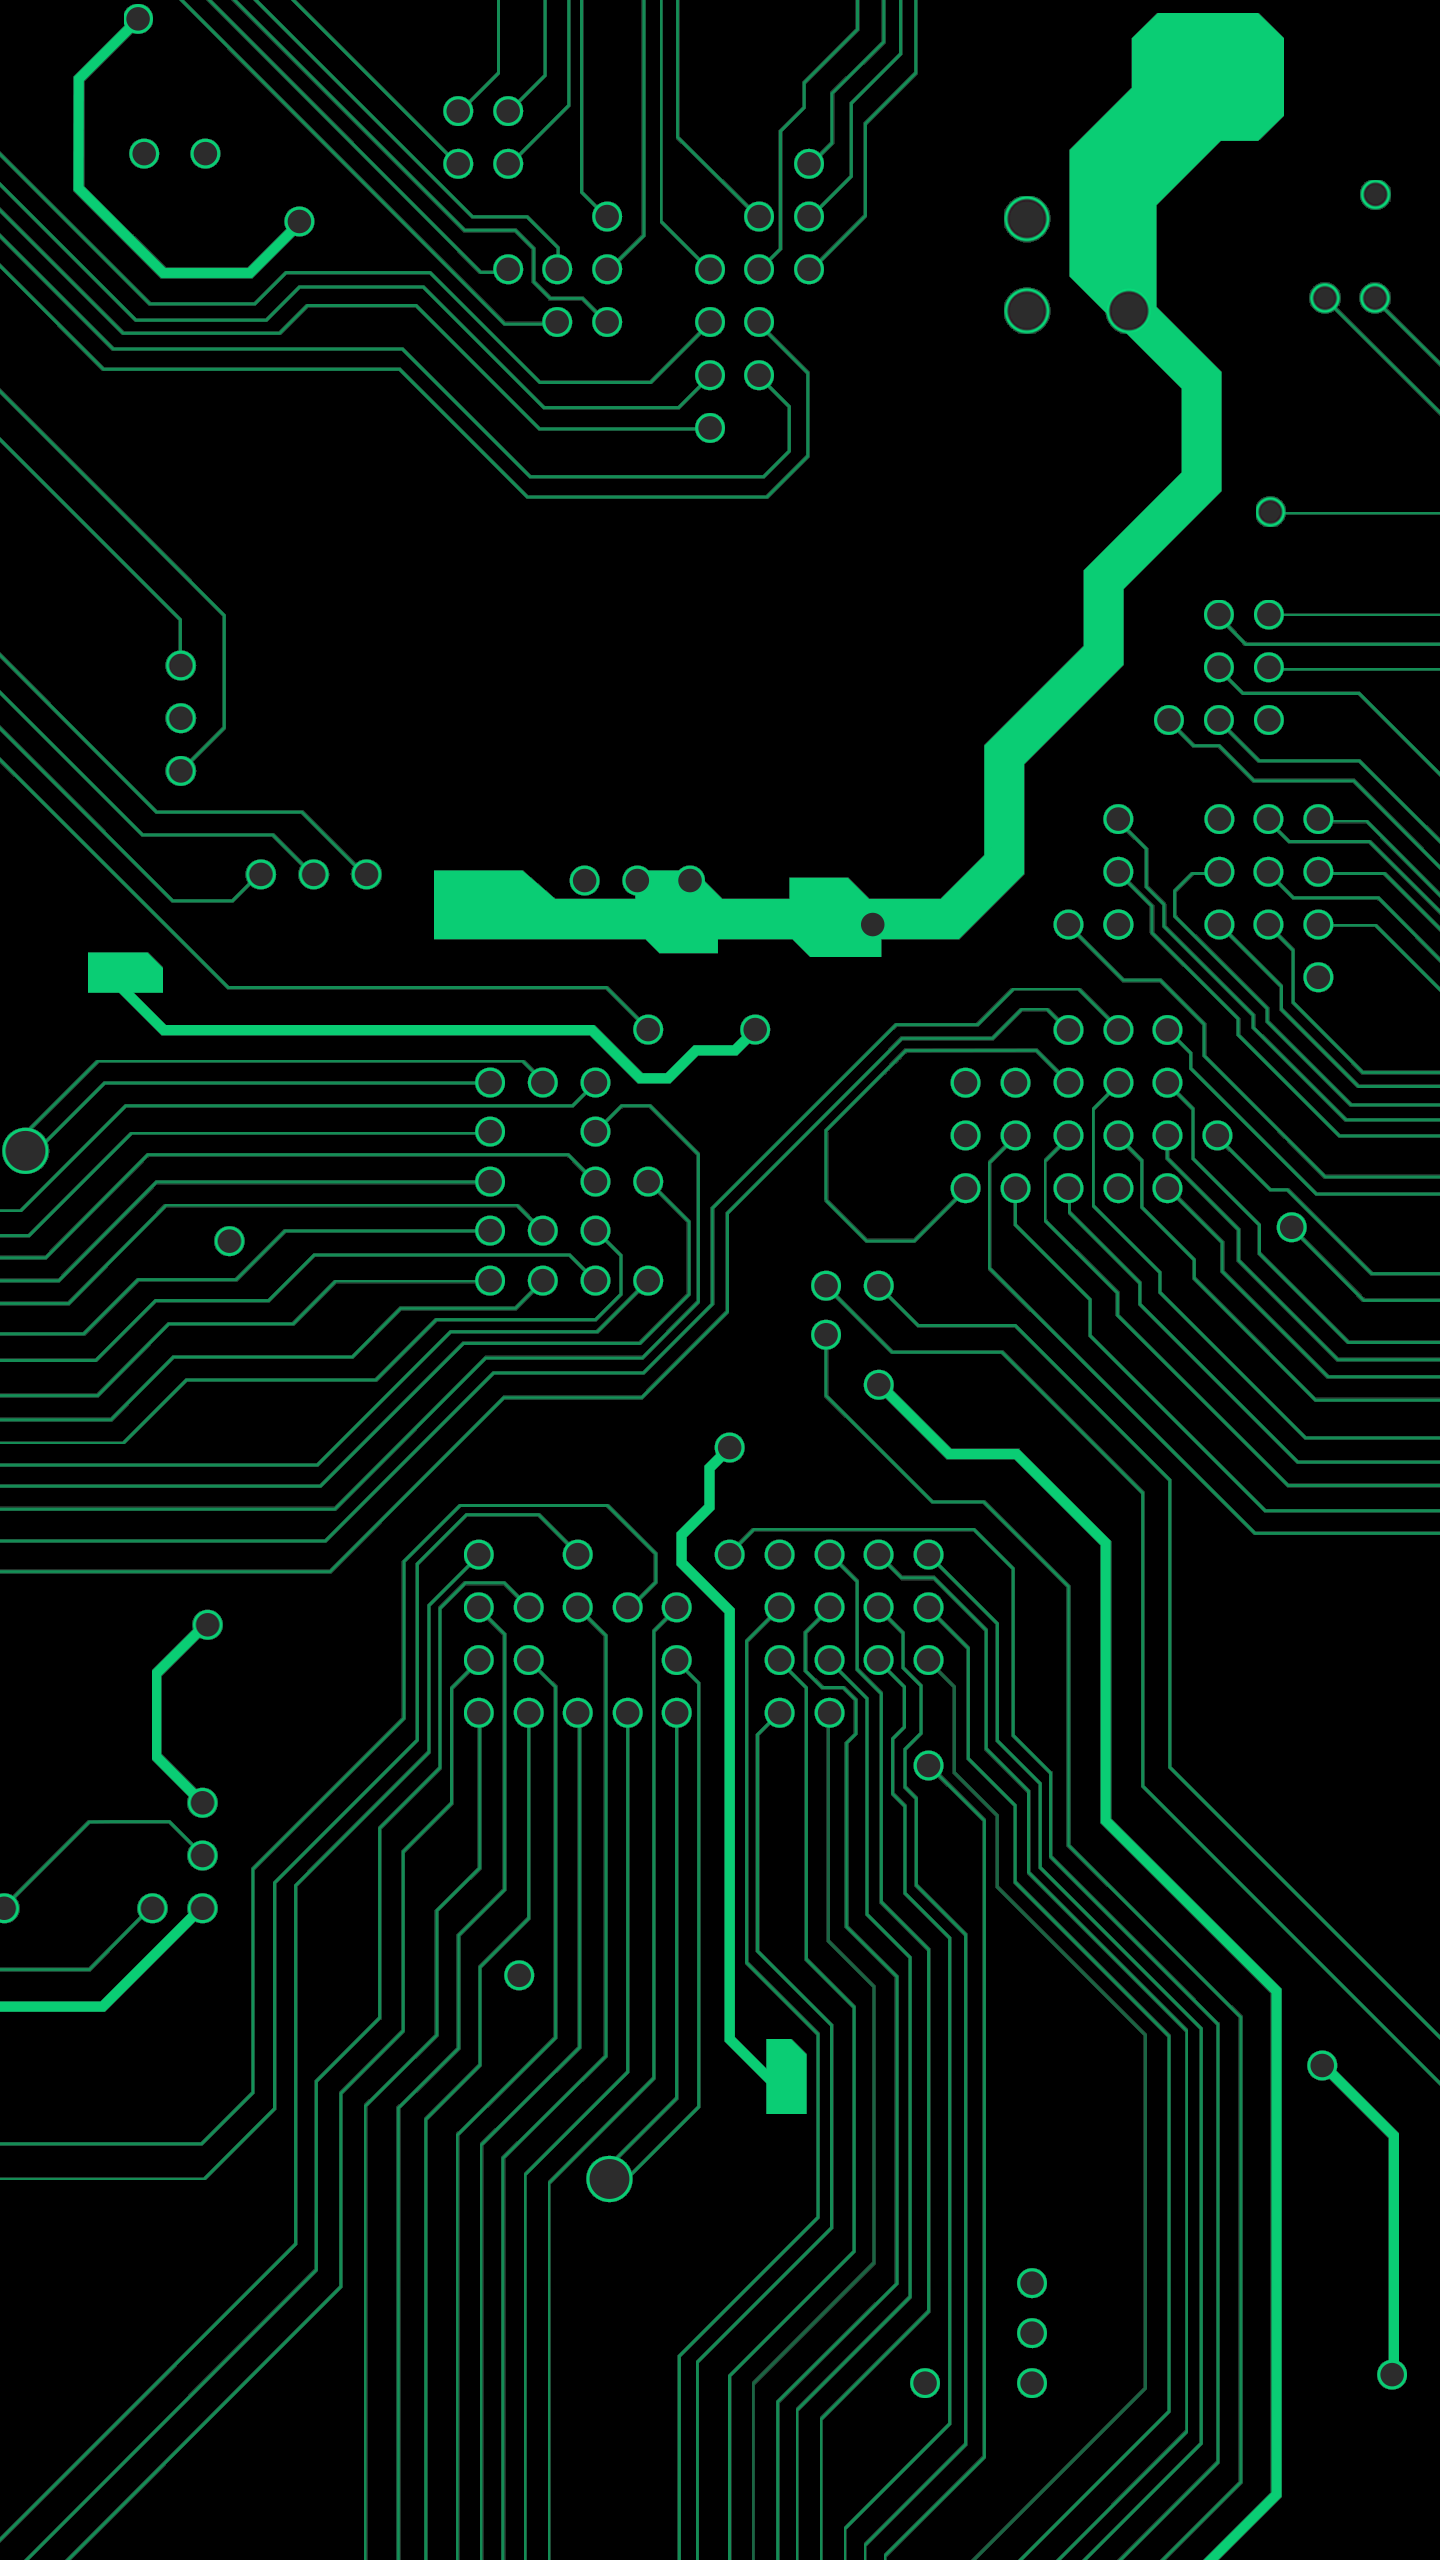 Microchip on circuit board wallpaper Vector Image  1807583  StockUnlimited